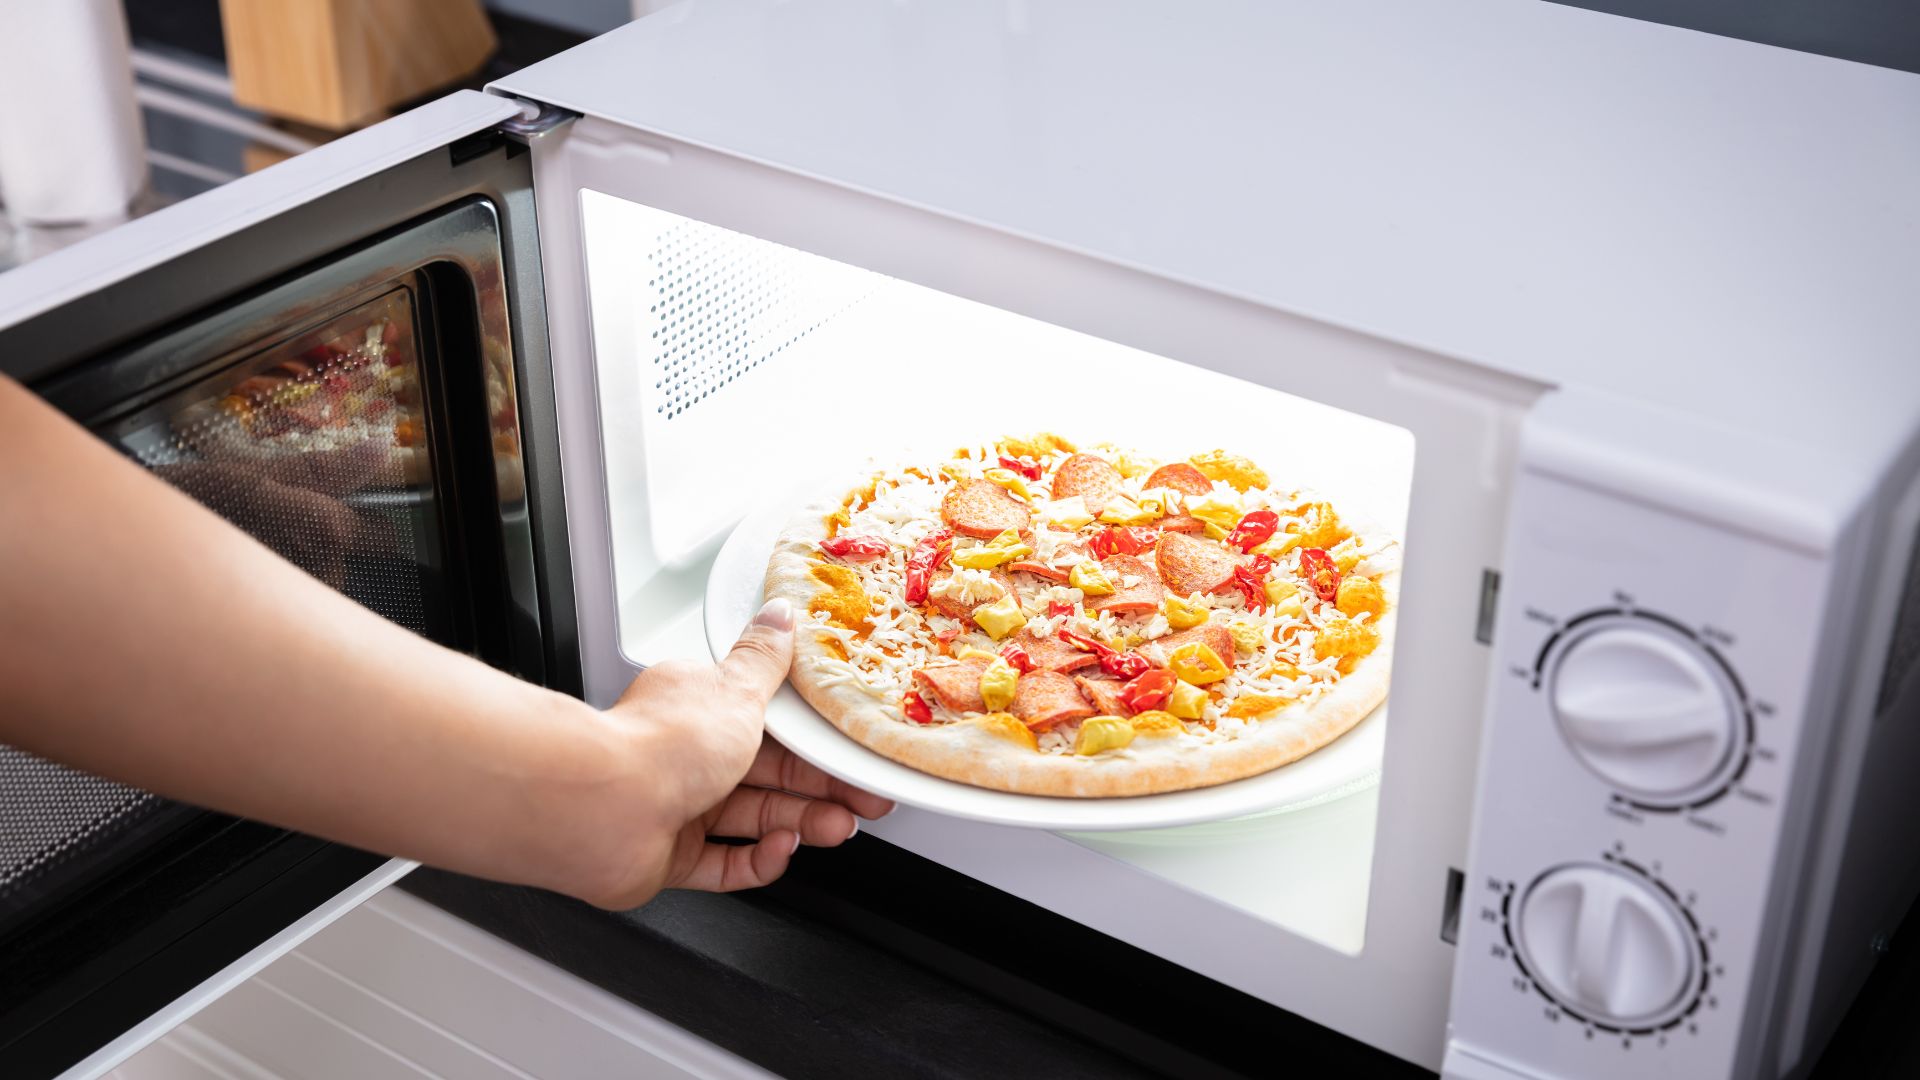 How To Cook Pizza In Microwave